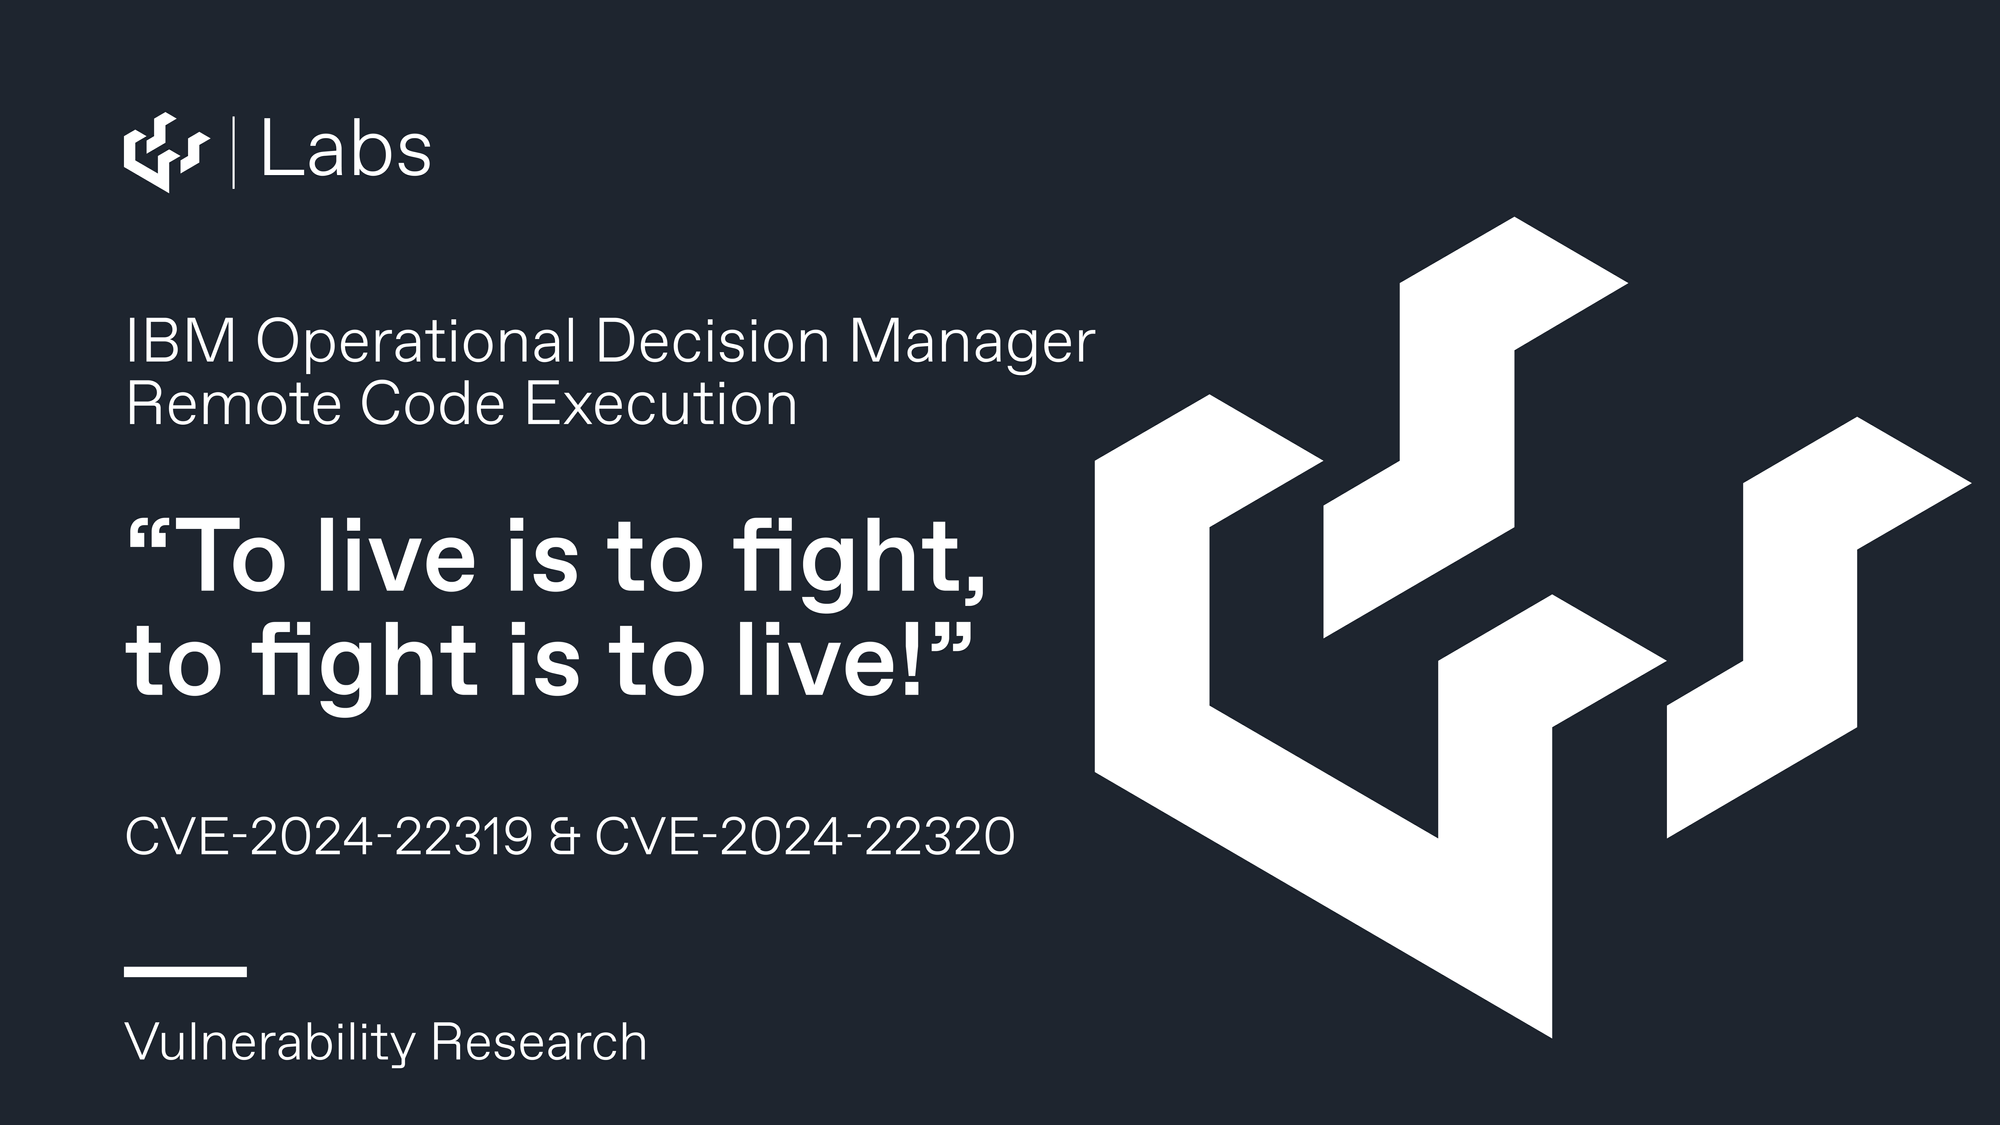 “To live is to fight, to fight is to live! - IBM ODM Remote Code Execution